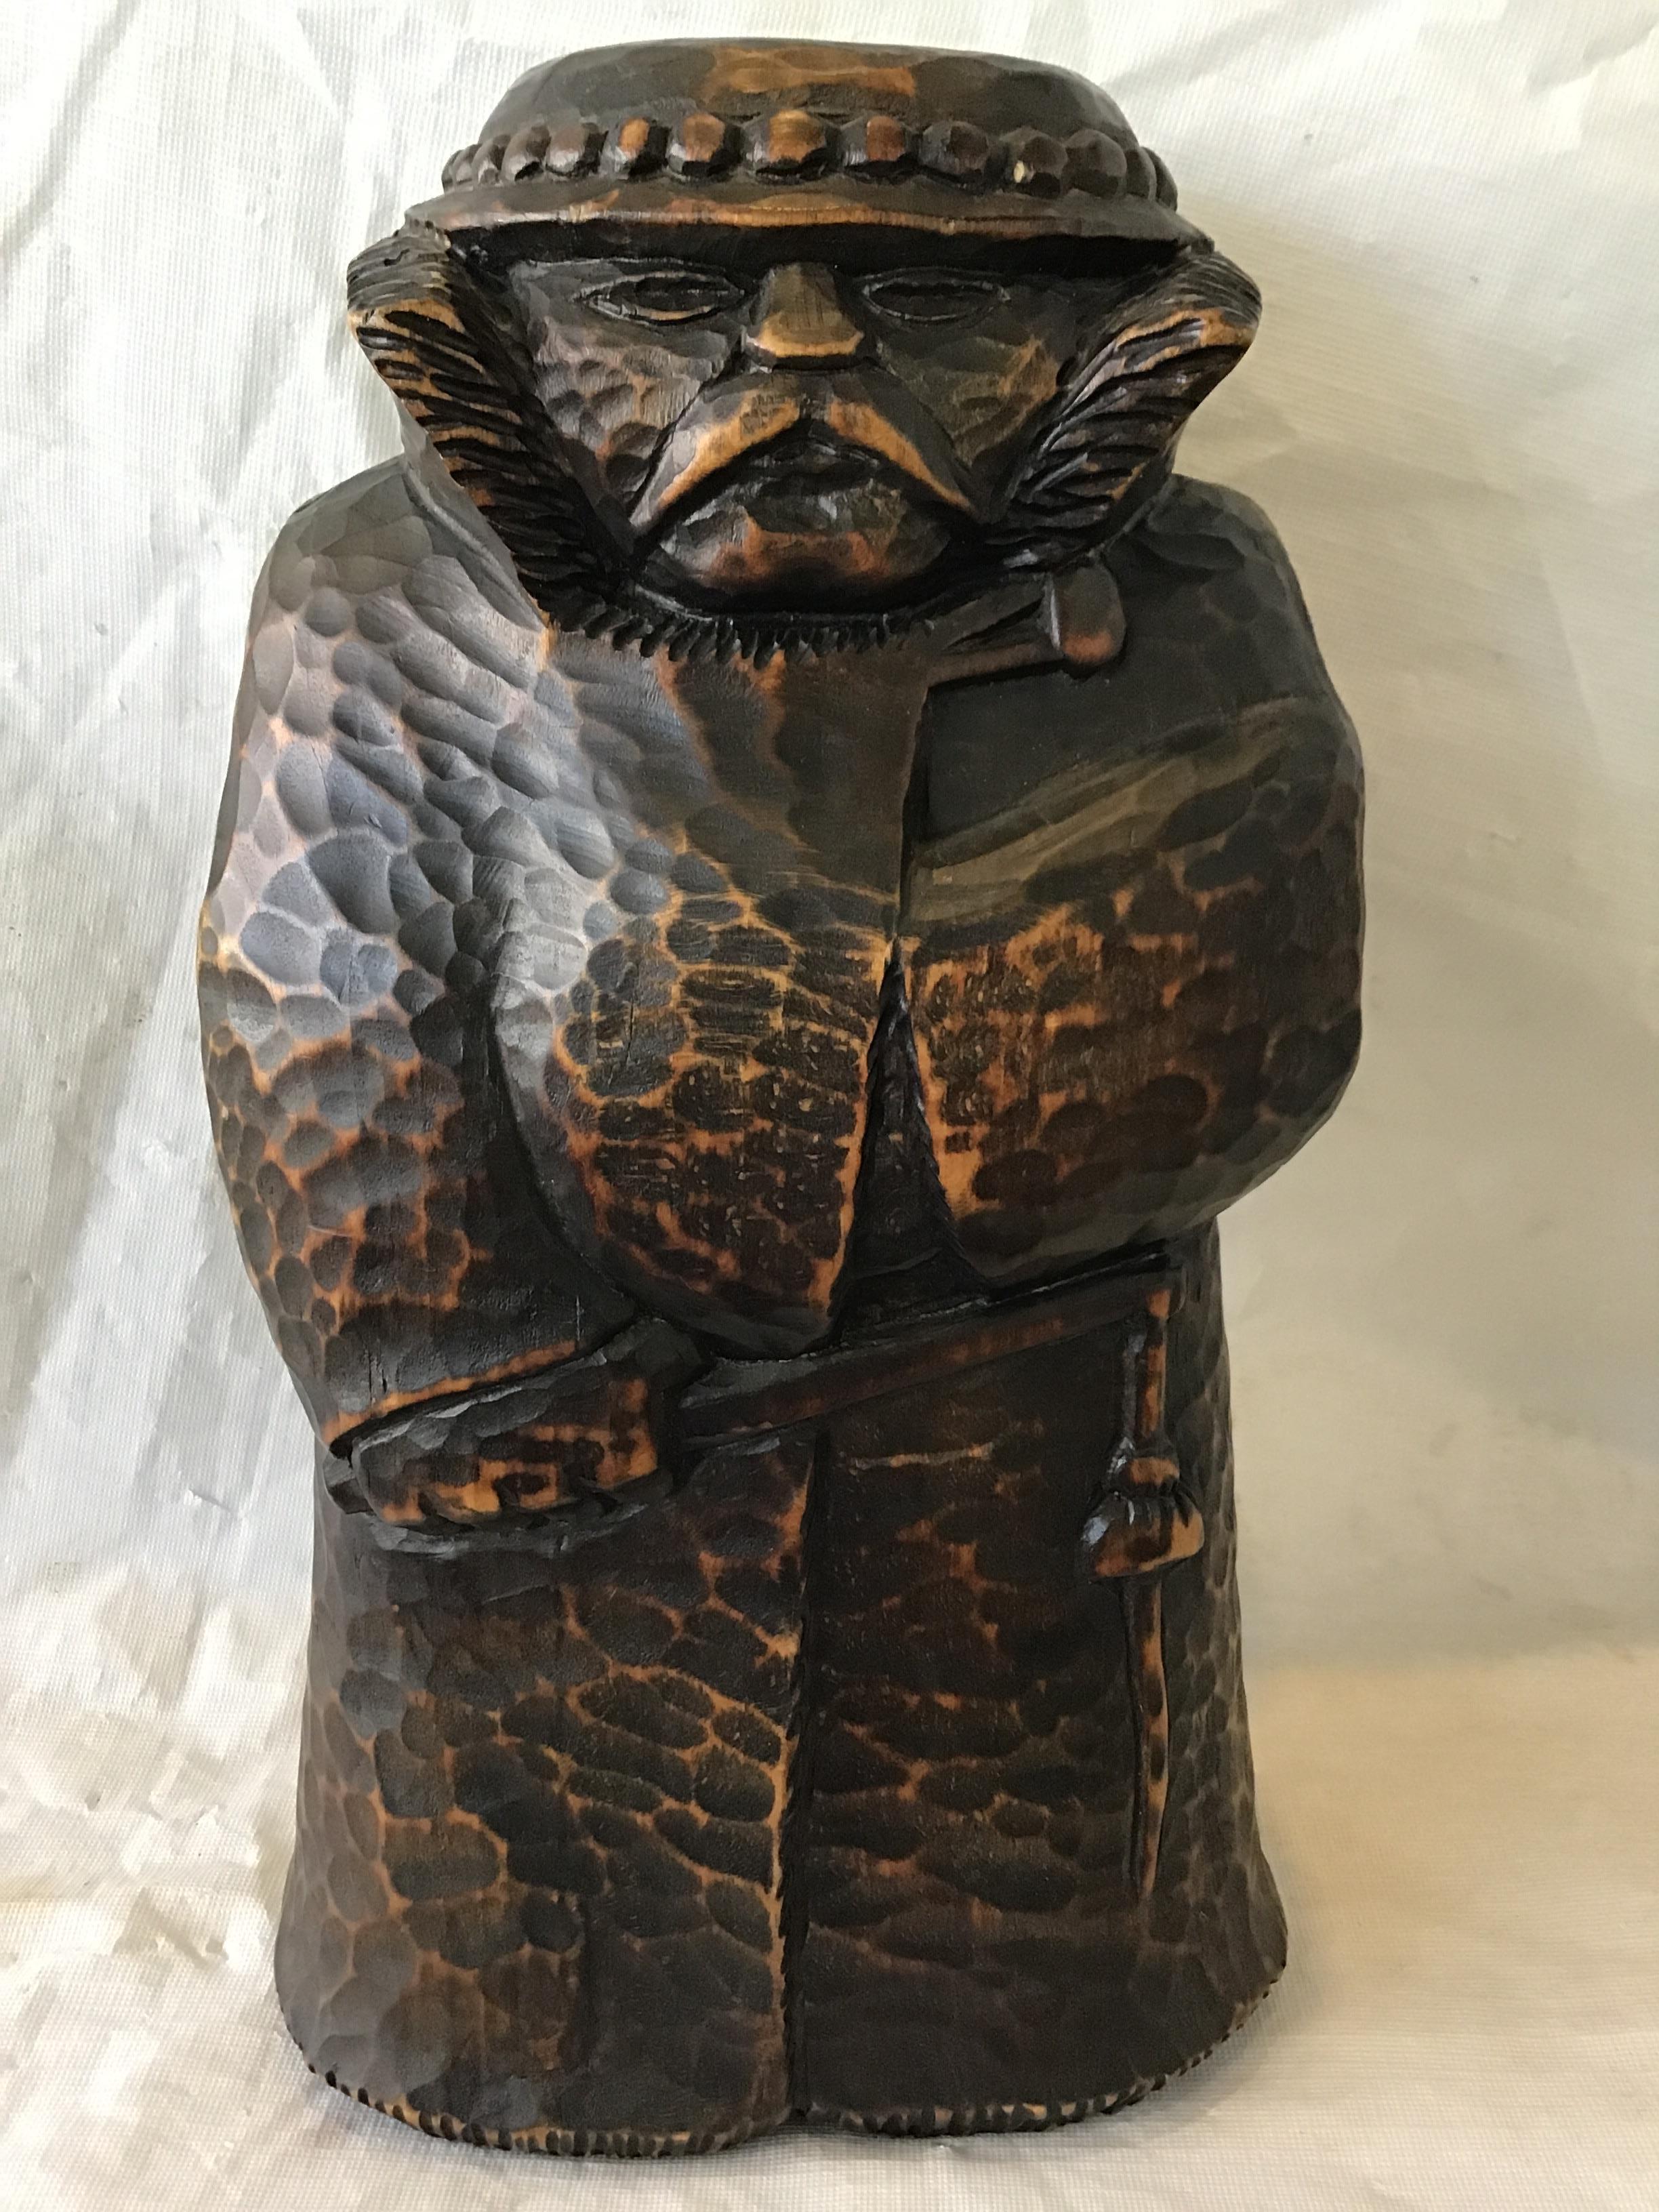 1920s hand carved wood figure, which has an insert to hide a bottle of alcohol. Great piece of Folk Art.